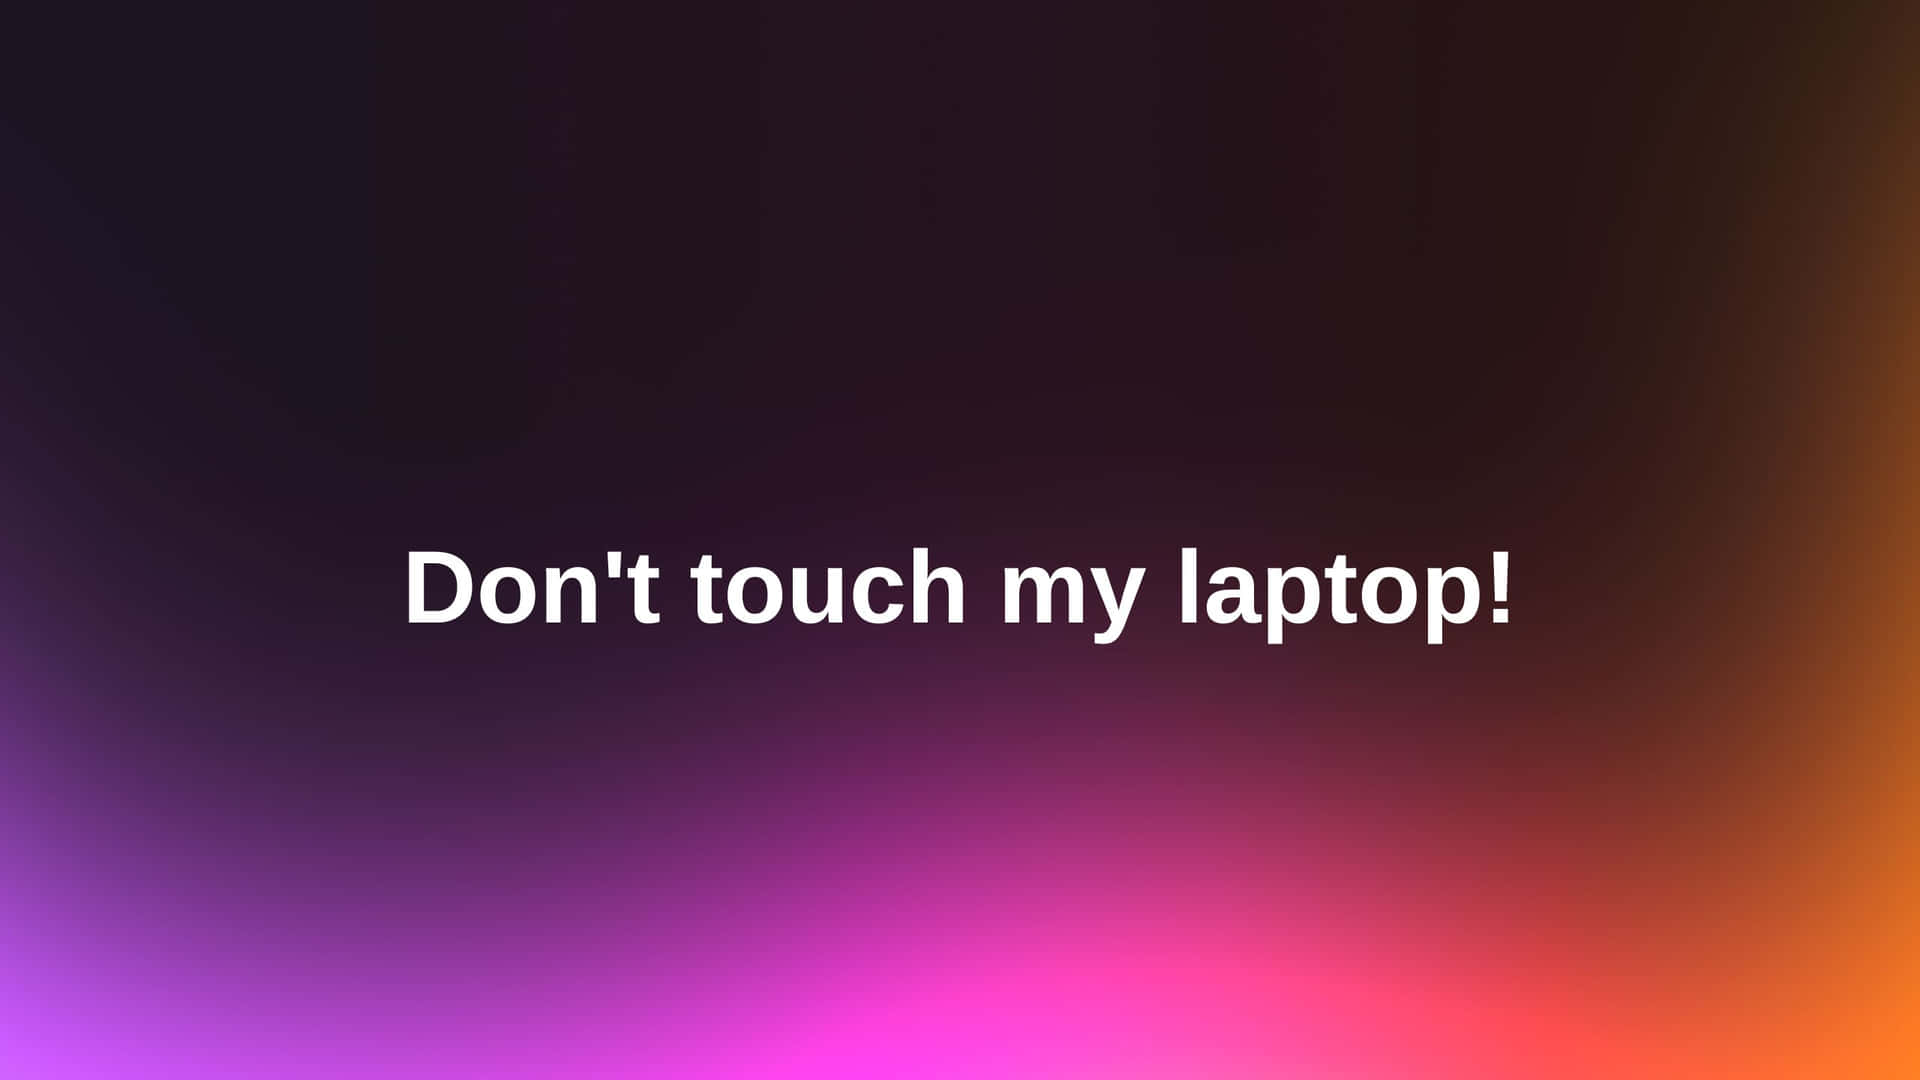 Download Don't Touch My Laptop Gradient Wallpaper | Wallpapers.com